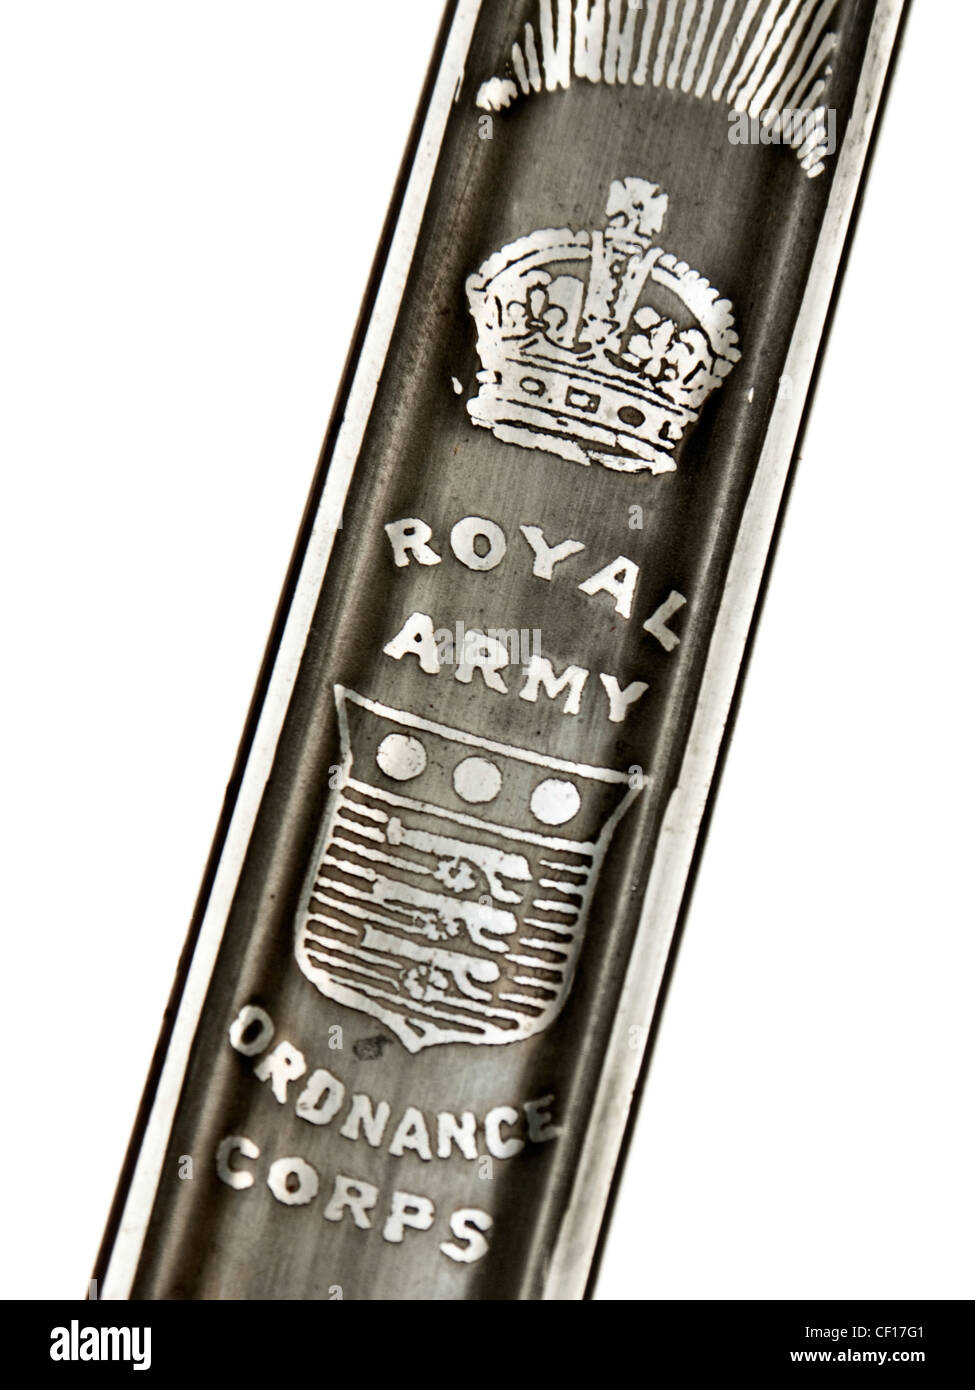 1951 vintage Royal Army Ordnance Corps Officer dress sword Stock Photo